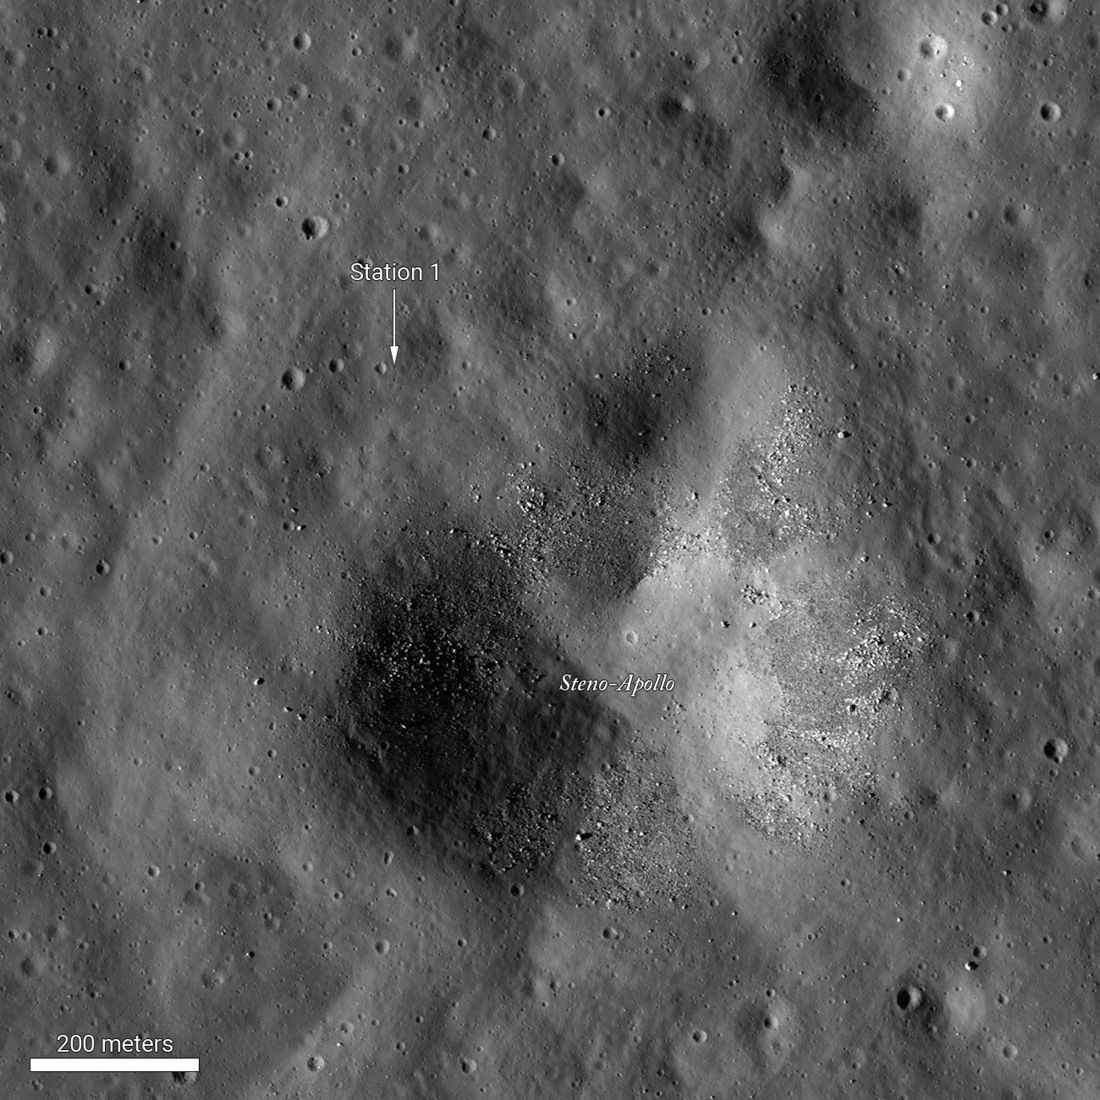 LROC NAC Image of the boulder riddled Steno crater showing the location of station 1, EVA 1 approximately 150 meters northwest or the rim.